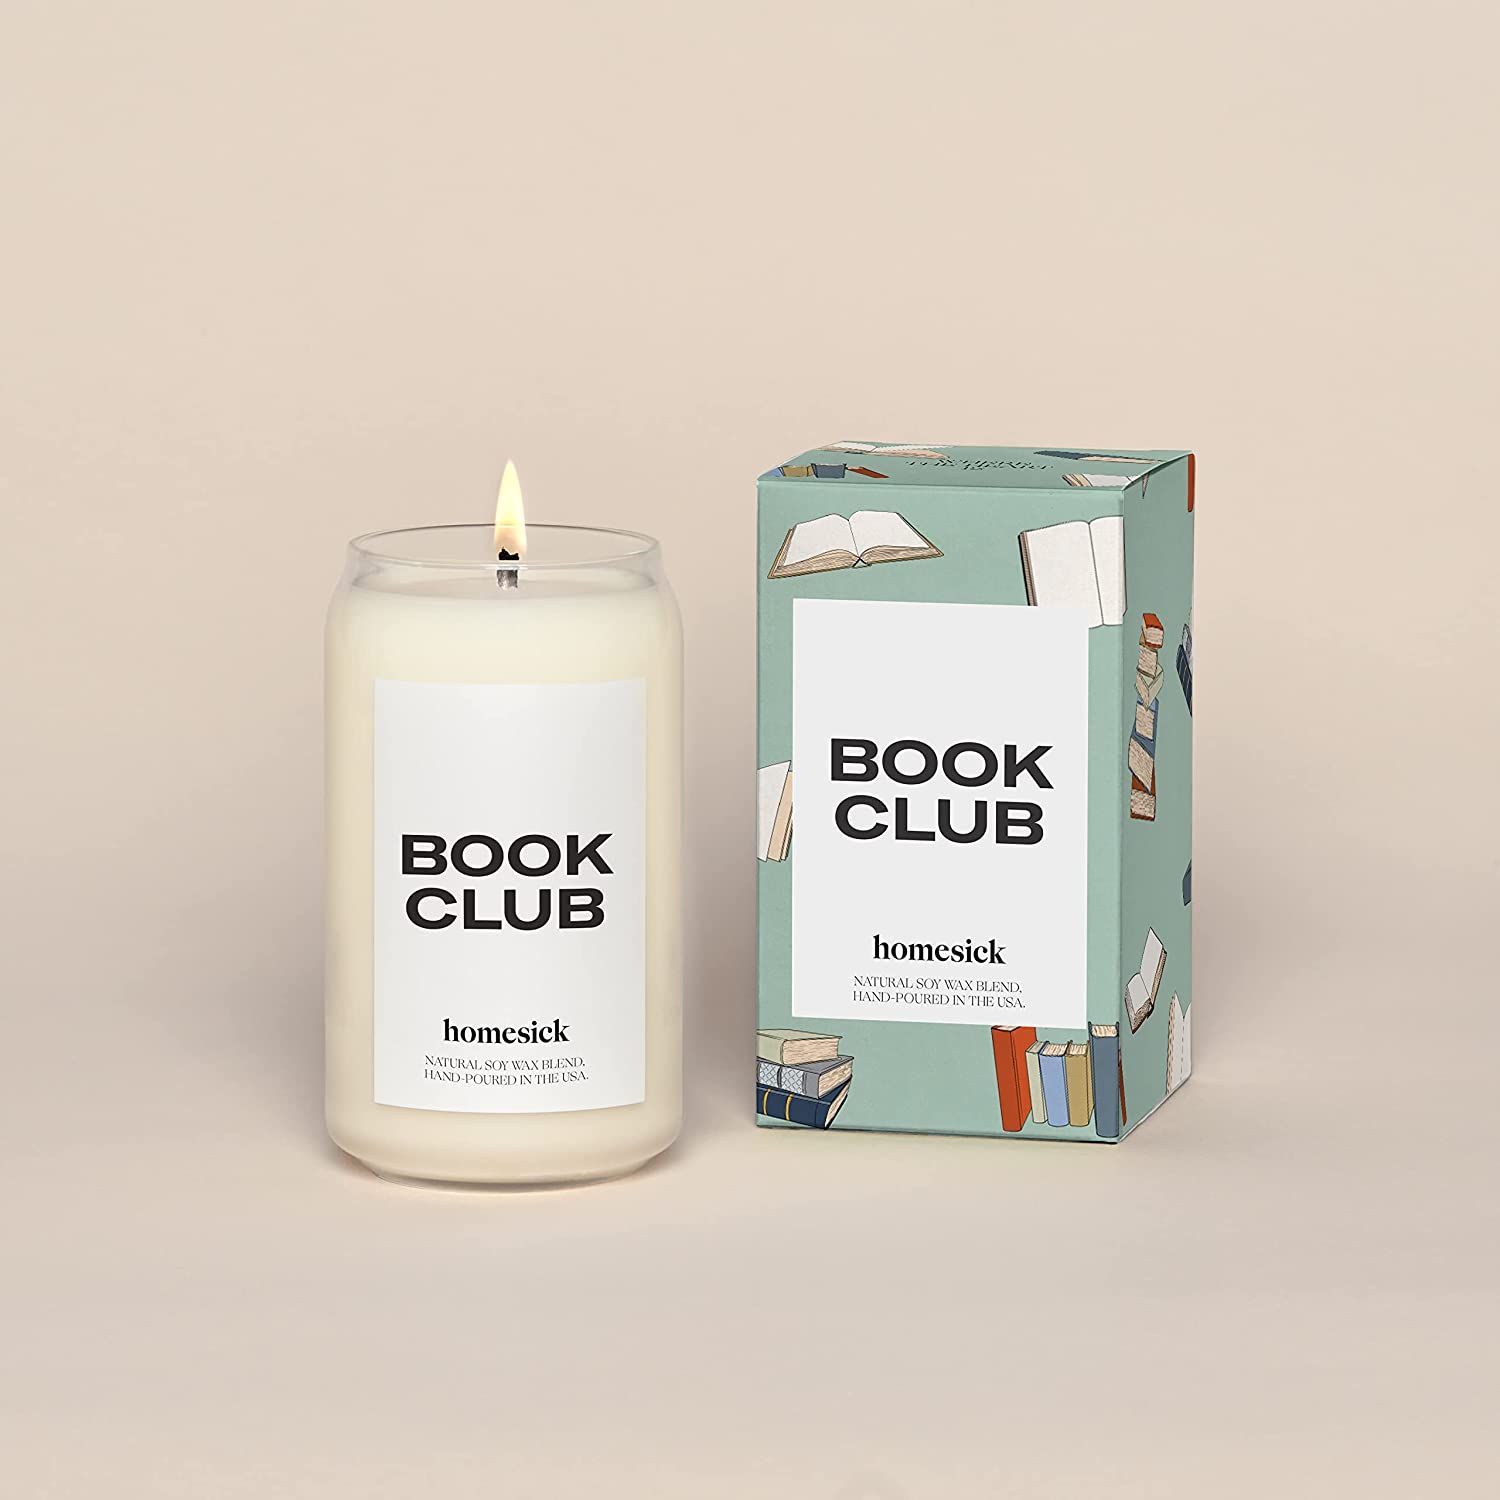 Image of the book club candle from homesick. 